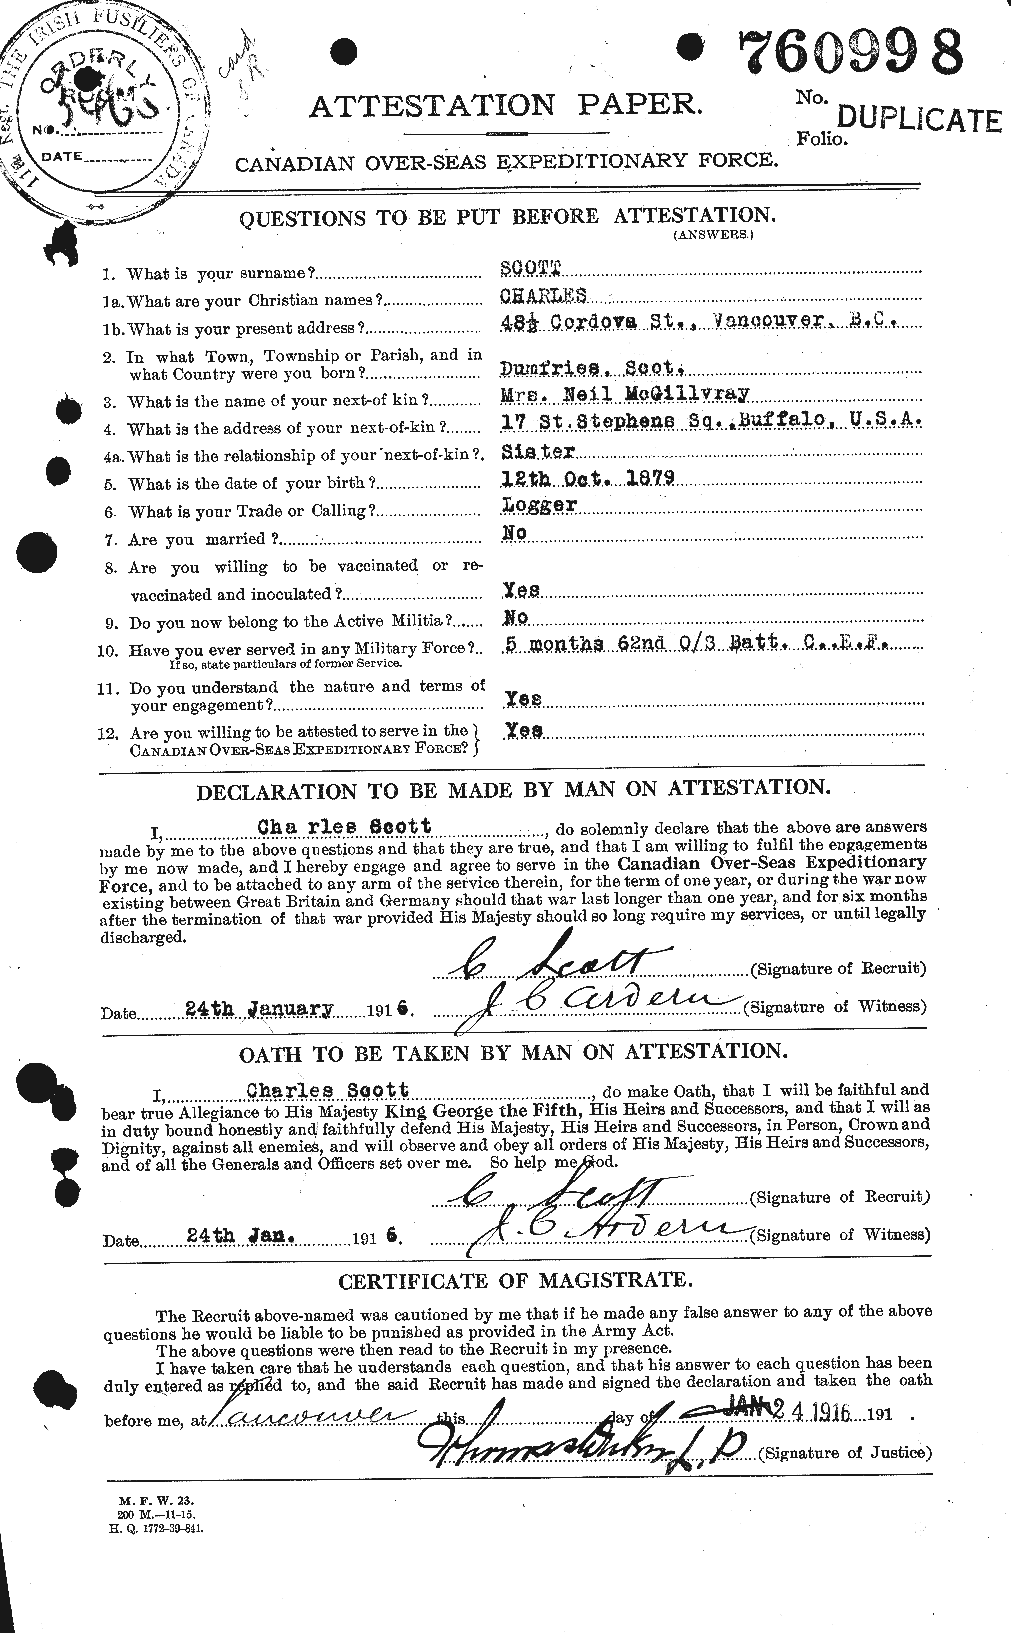 Personnel Records of the First World War - CEF 086190a